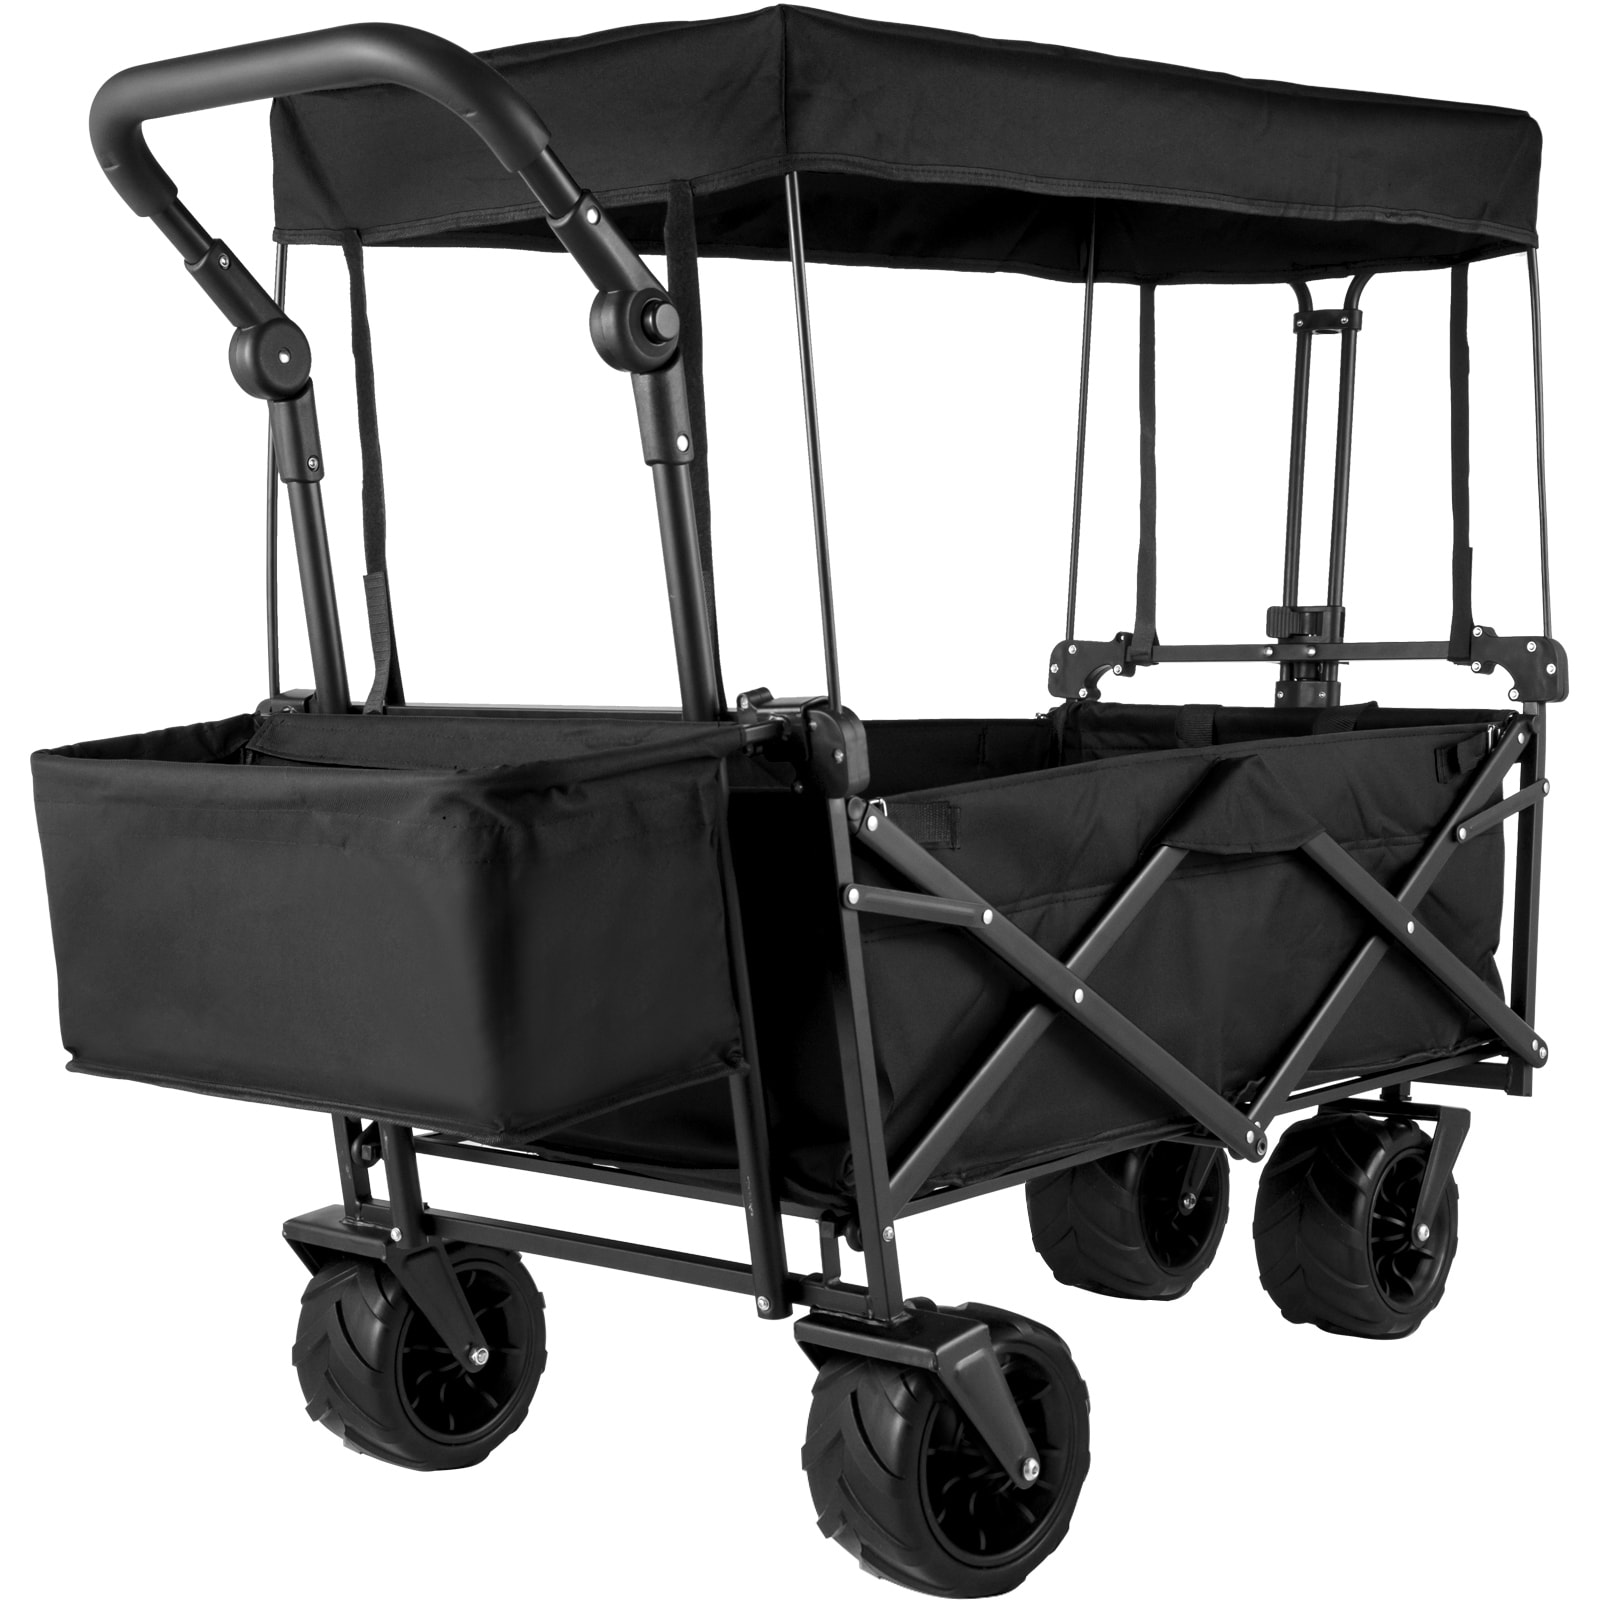 Image of Lawn tractor cart with canopy